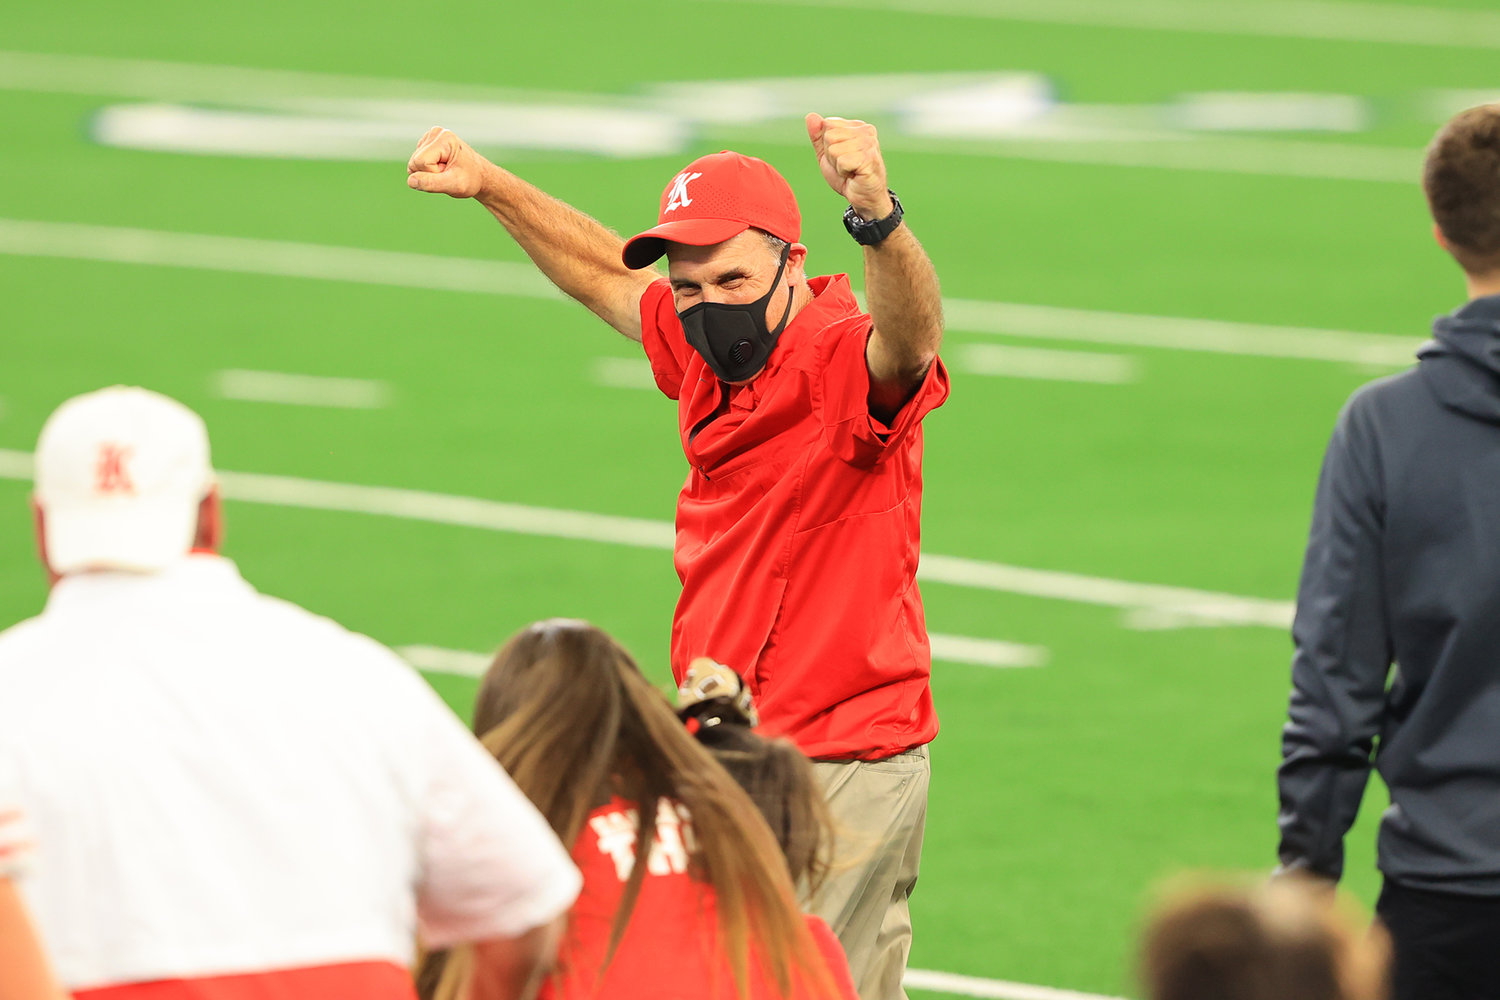 Katy coach Gary Joseph celebrates after the Tigers beat Cedar Hill, 51-14, at AT&T Stadium on Saturday afternoon to win the Class 6A-Division II state championship.